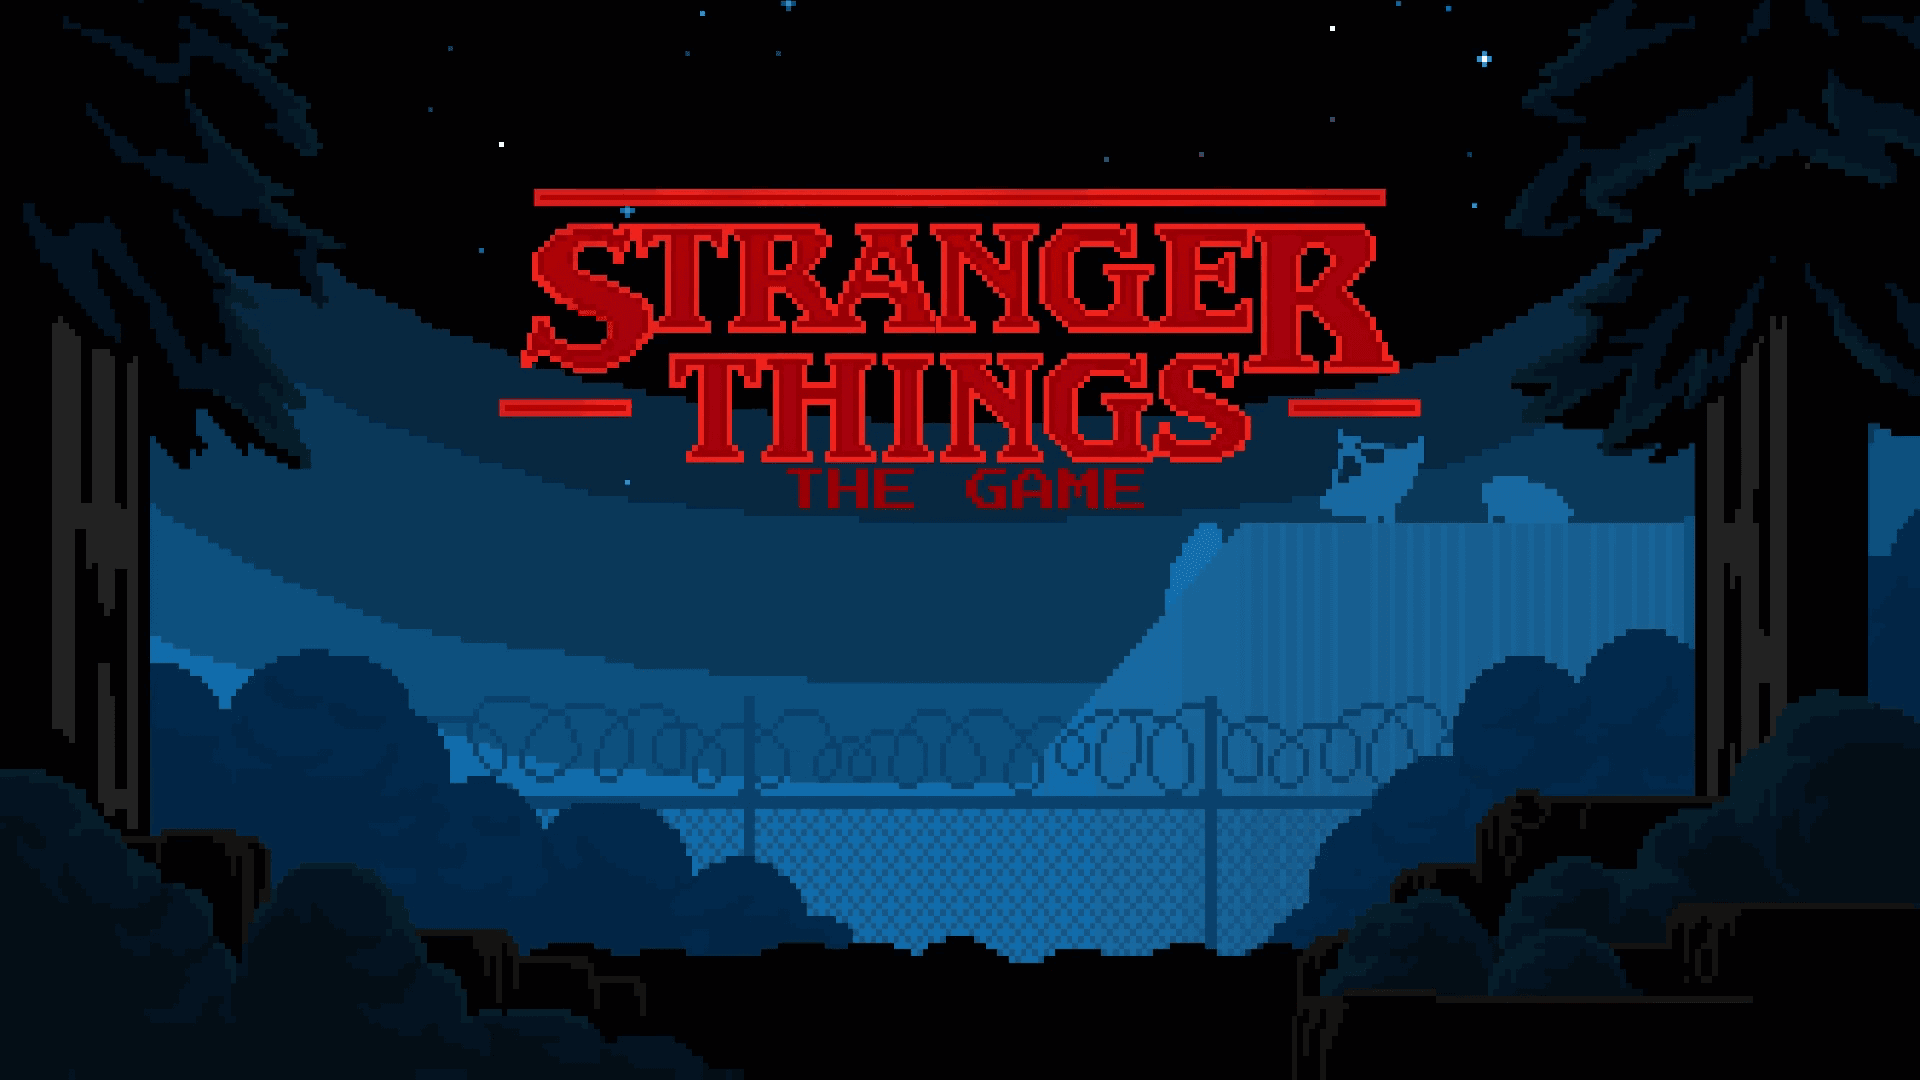 Stranger Things 3 The Game PS4 Version Full Game Free Download